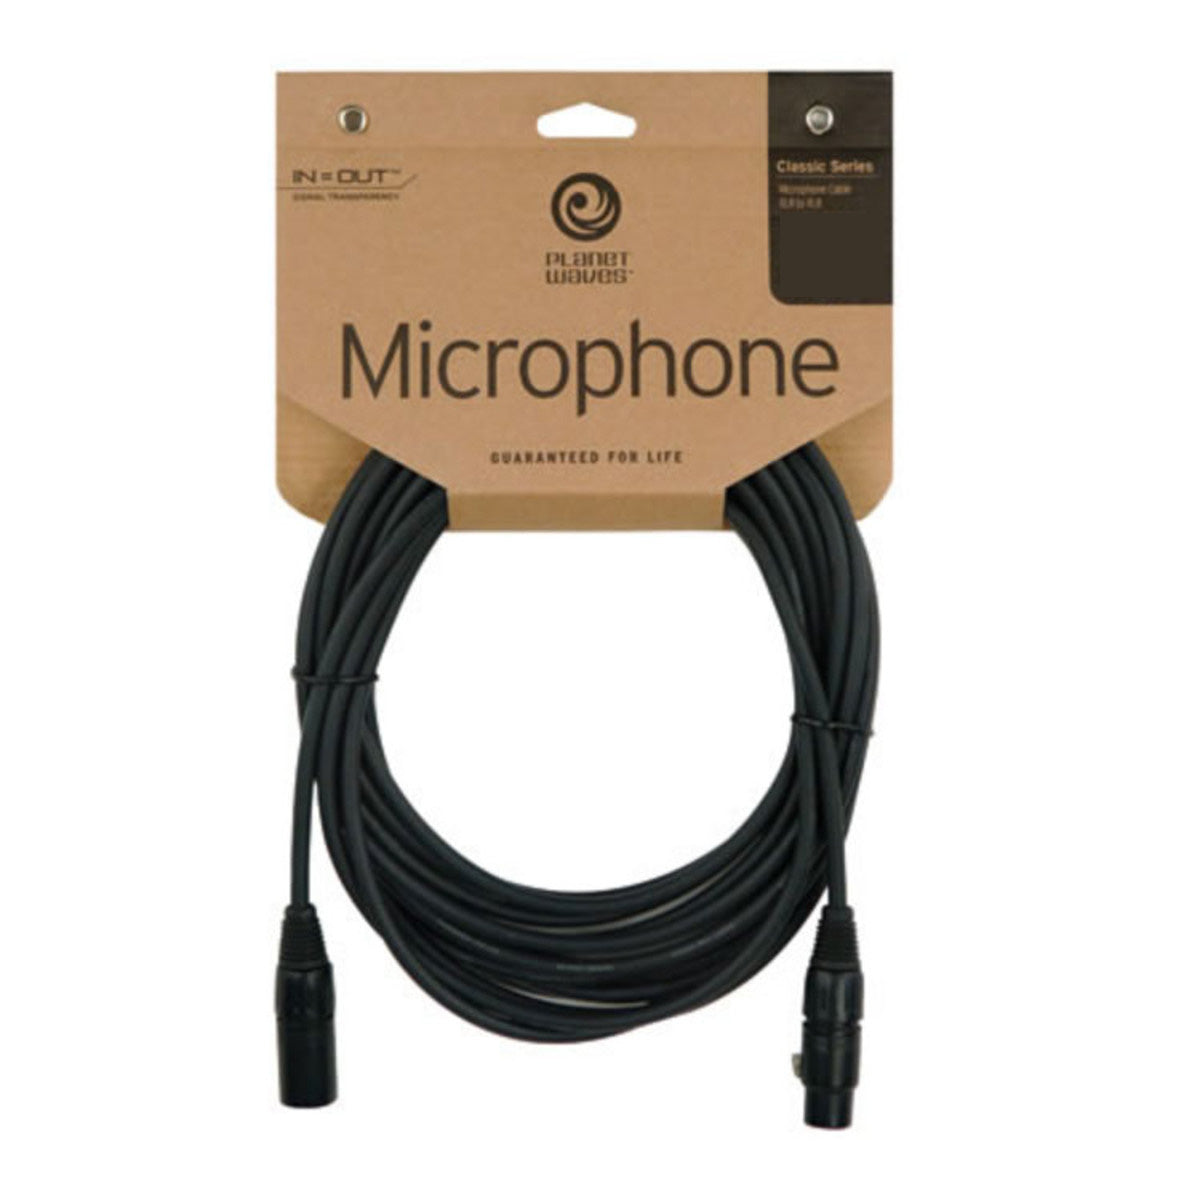 Planet Waves Classic Series Mic Cable 10ft